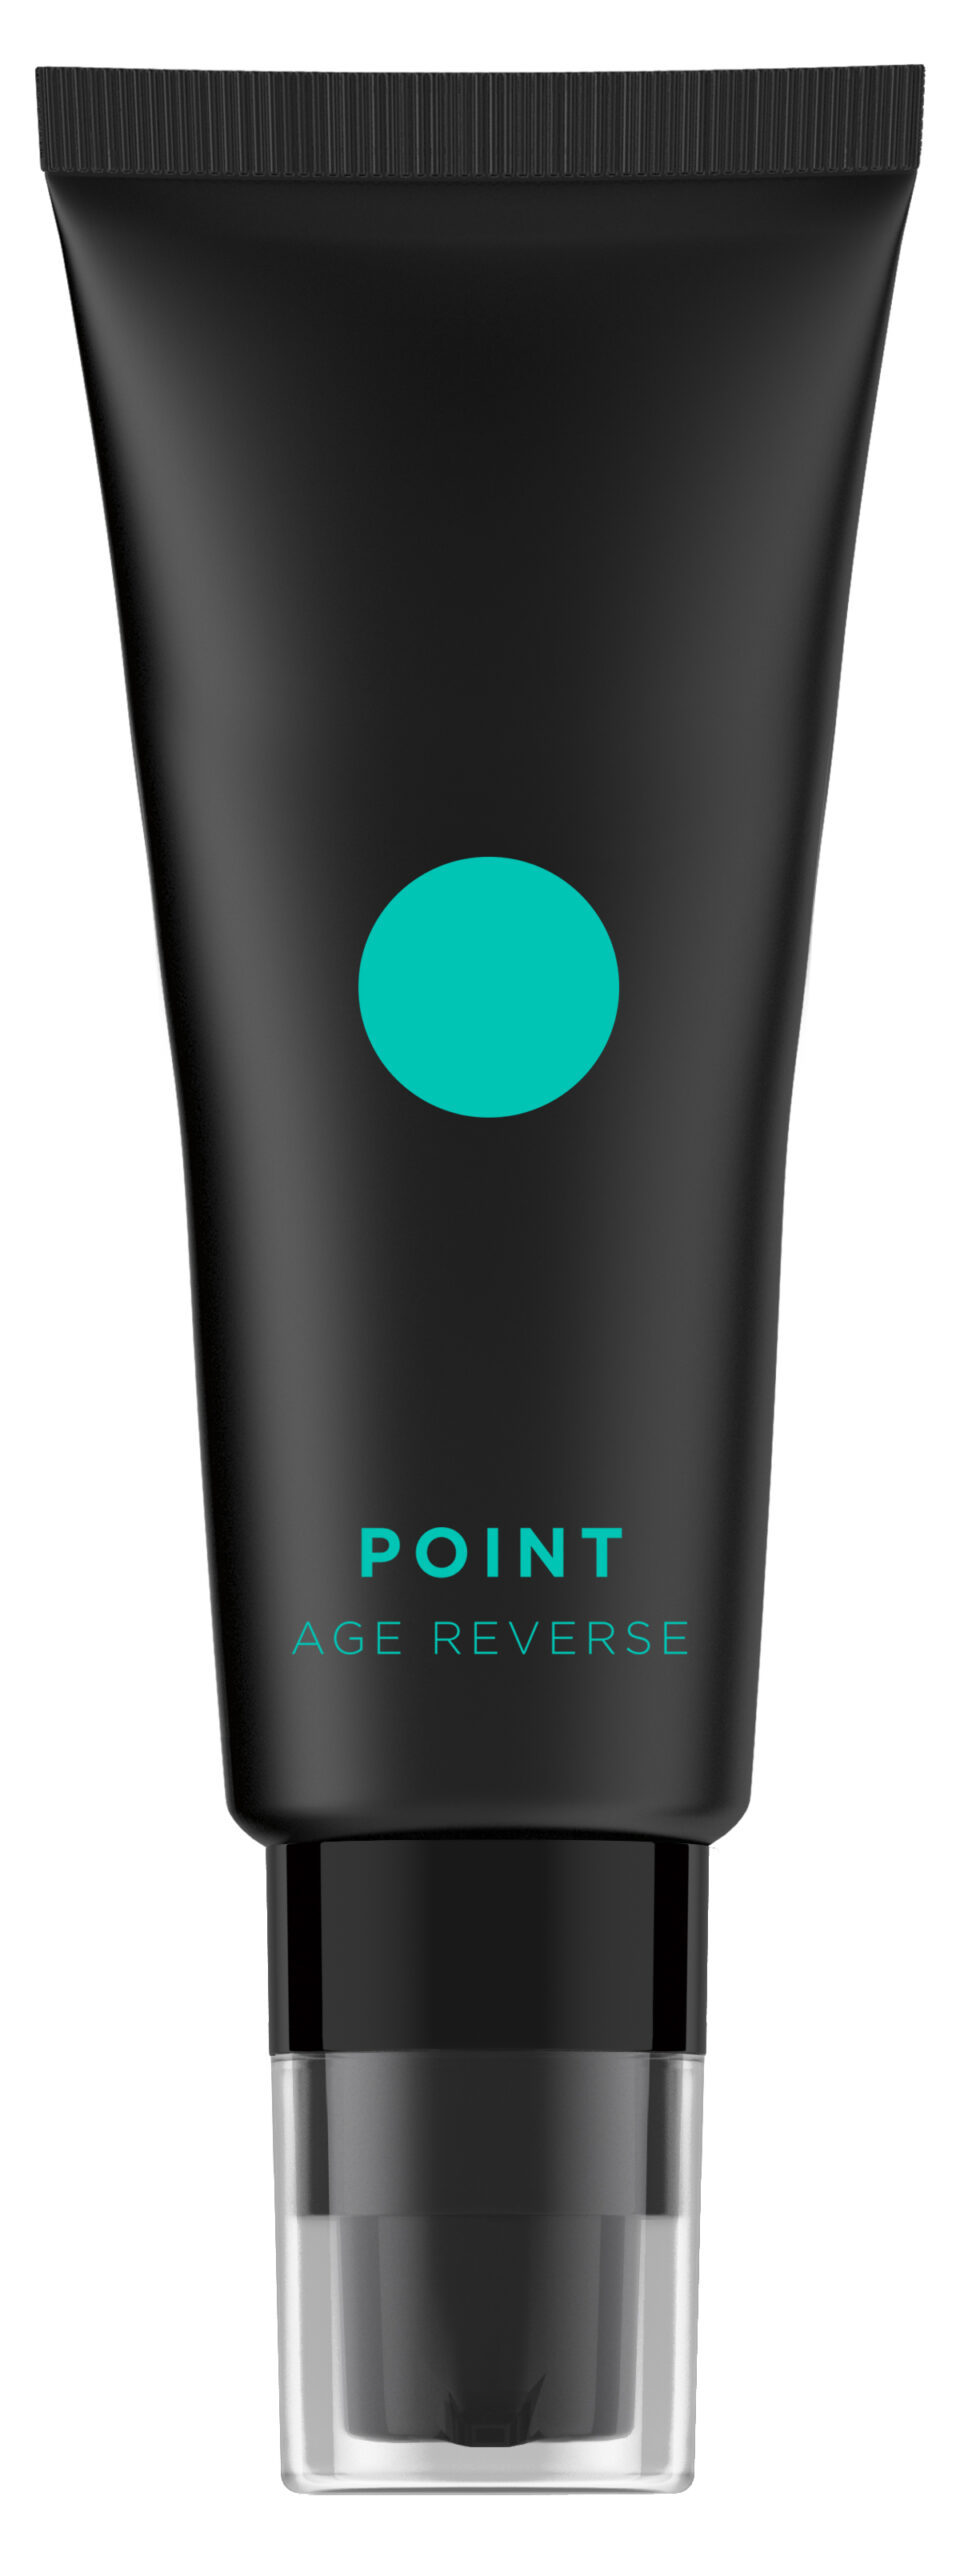 POINT Age Reverse